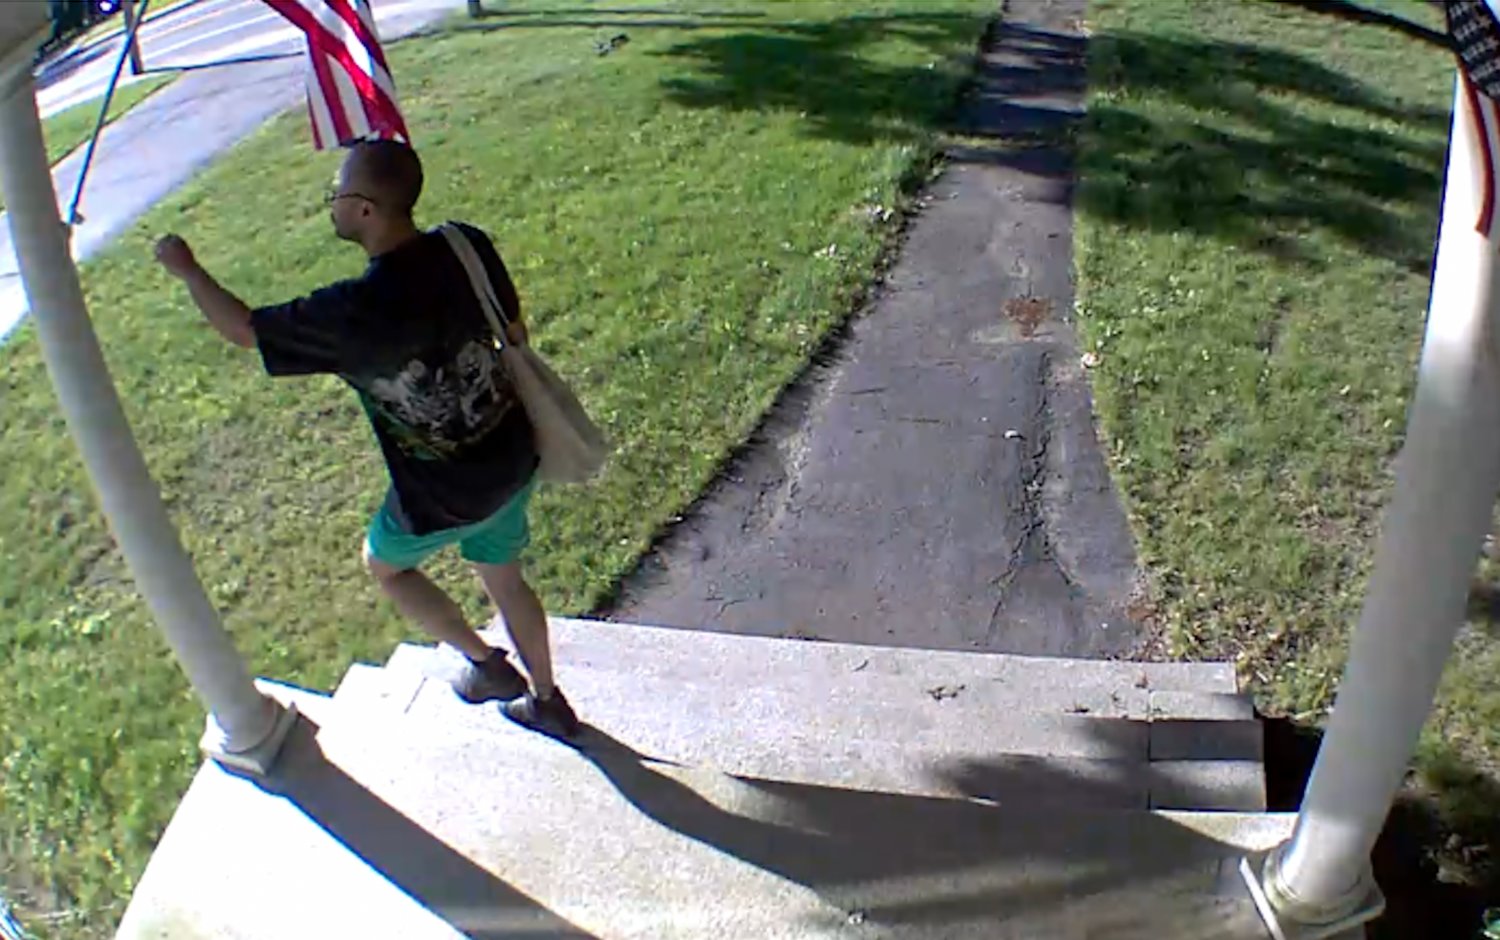 Barrington Police are searching for a man who stole an American flag from the front porch of a County Road home on Thursday, June 30.